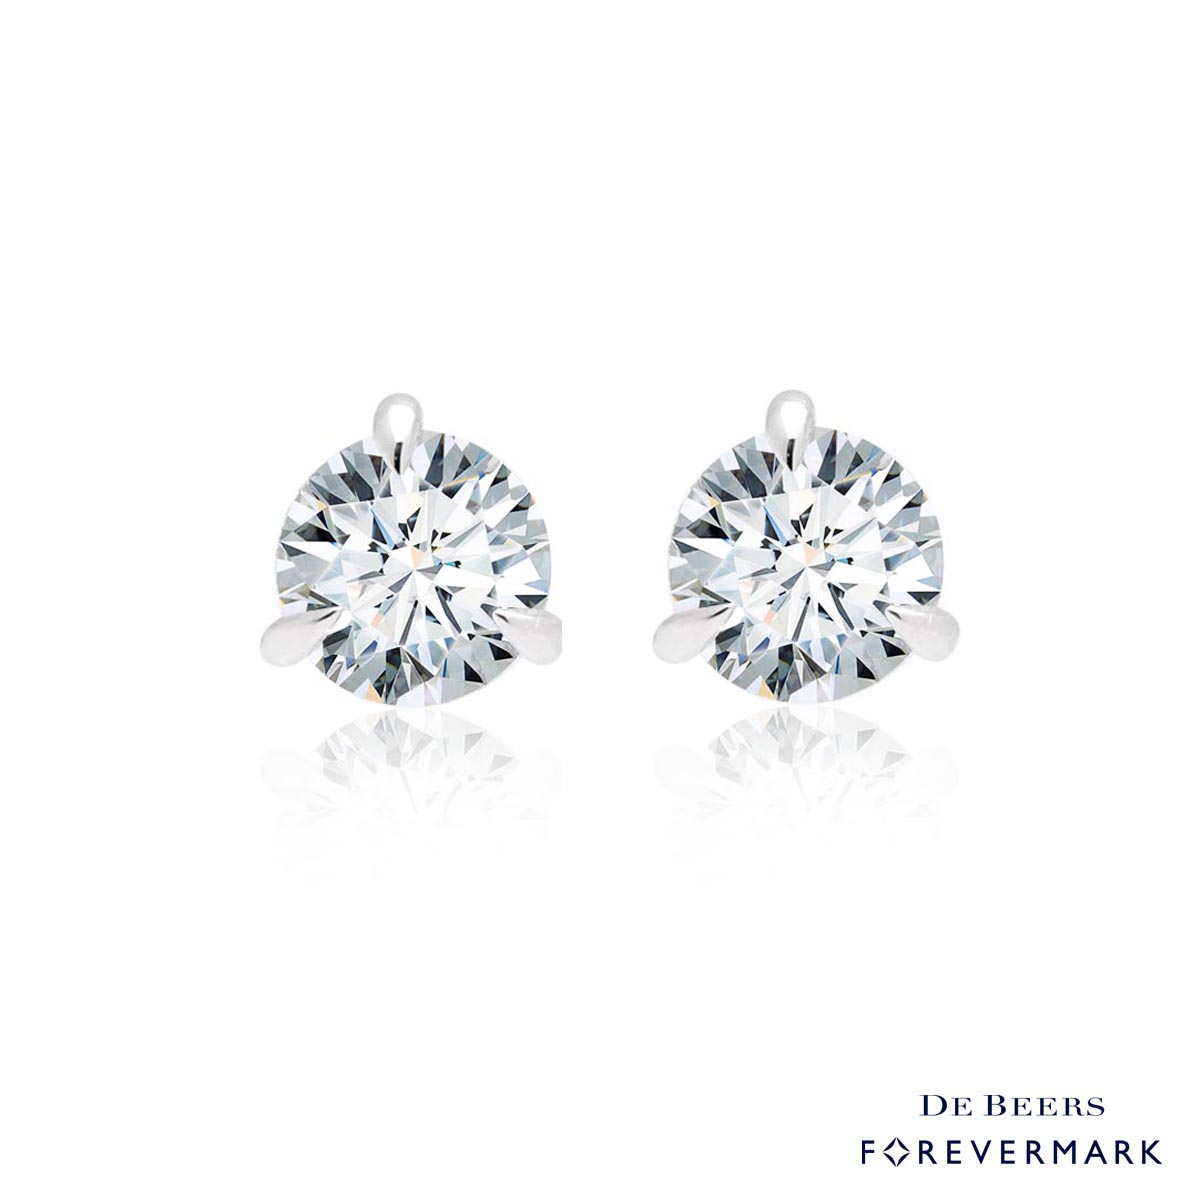 De Beers Forevermark Solitaire Diamond Stud Earrings in 14kt White Gold (1/2ct tw)